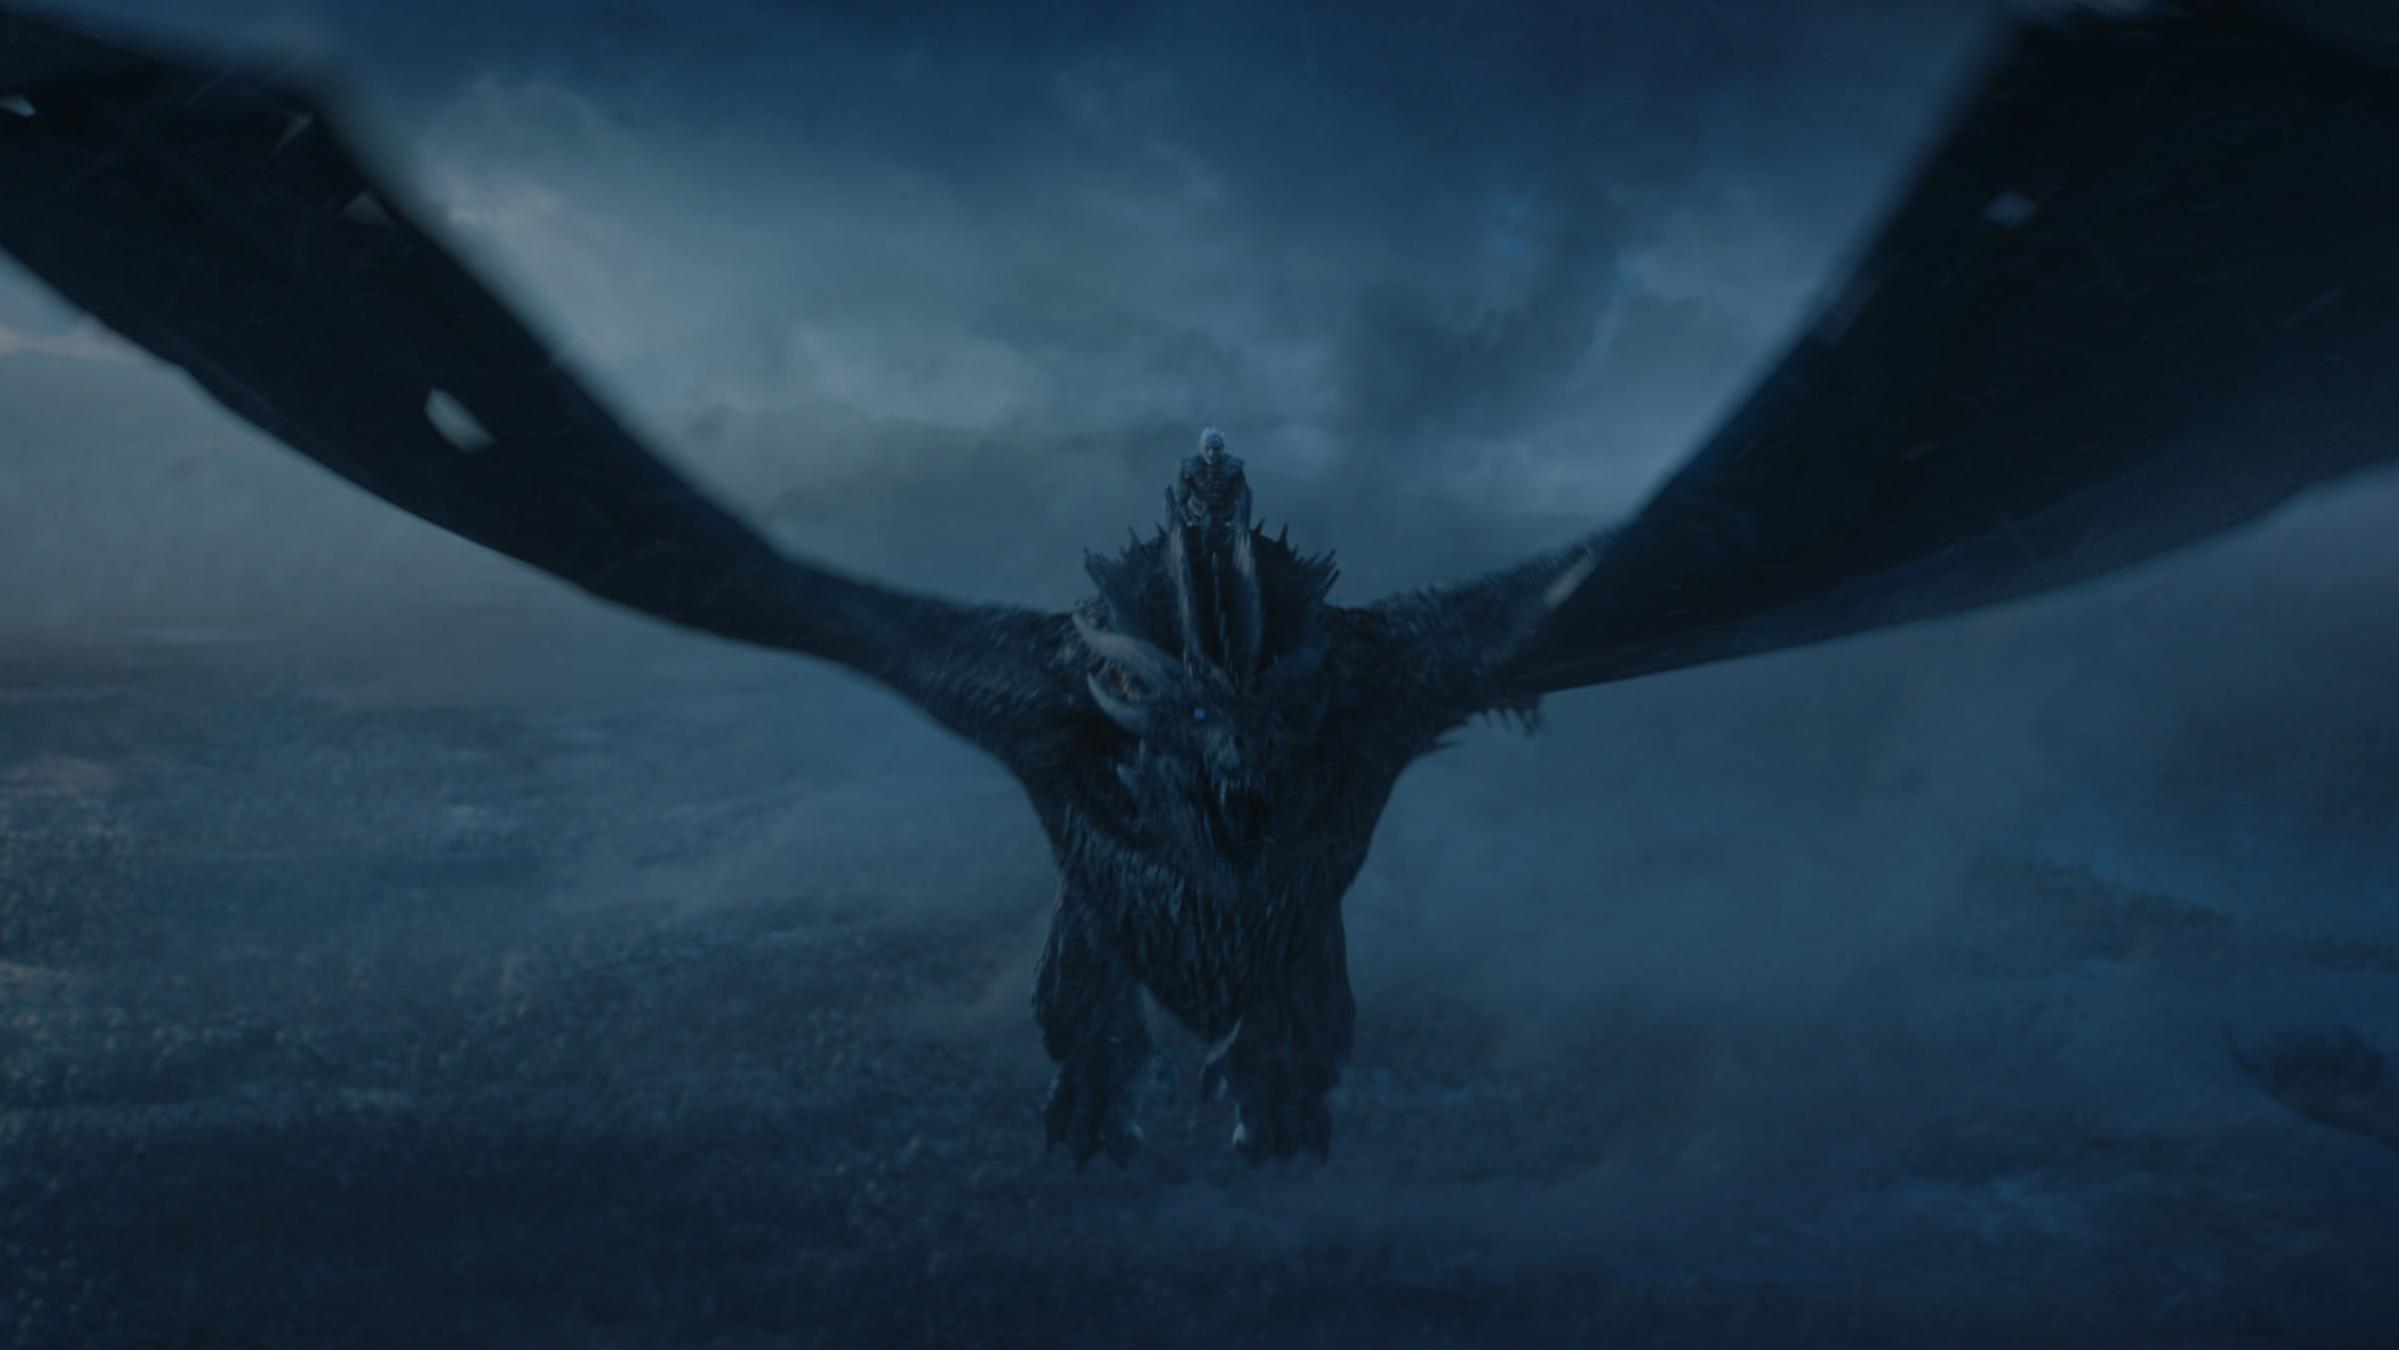 Viserion is one of the top 10 fictional characters of 2017.